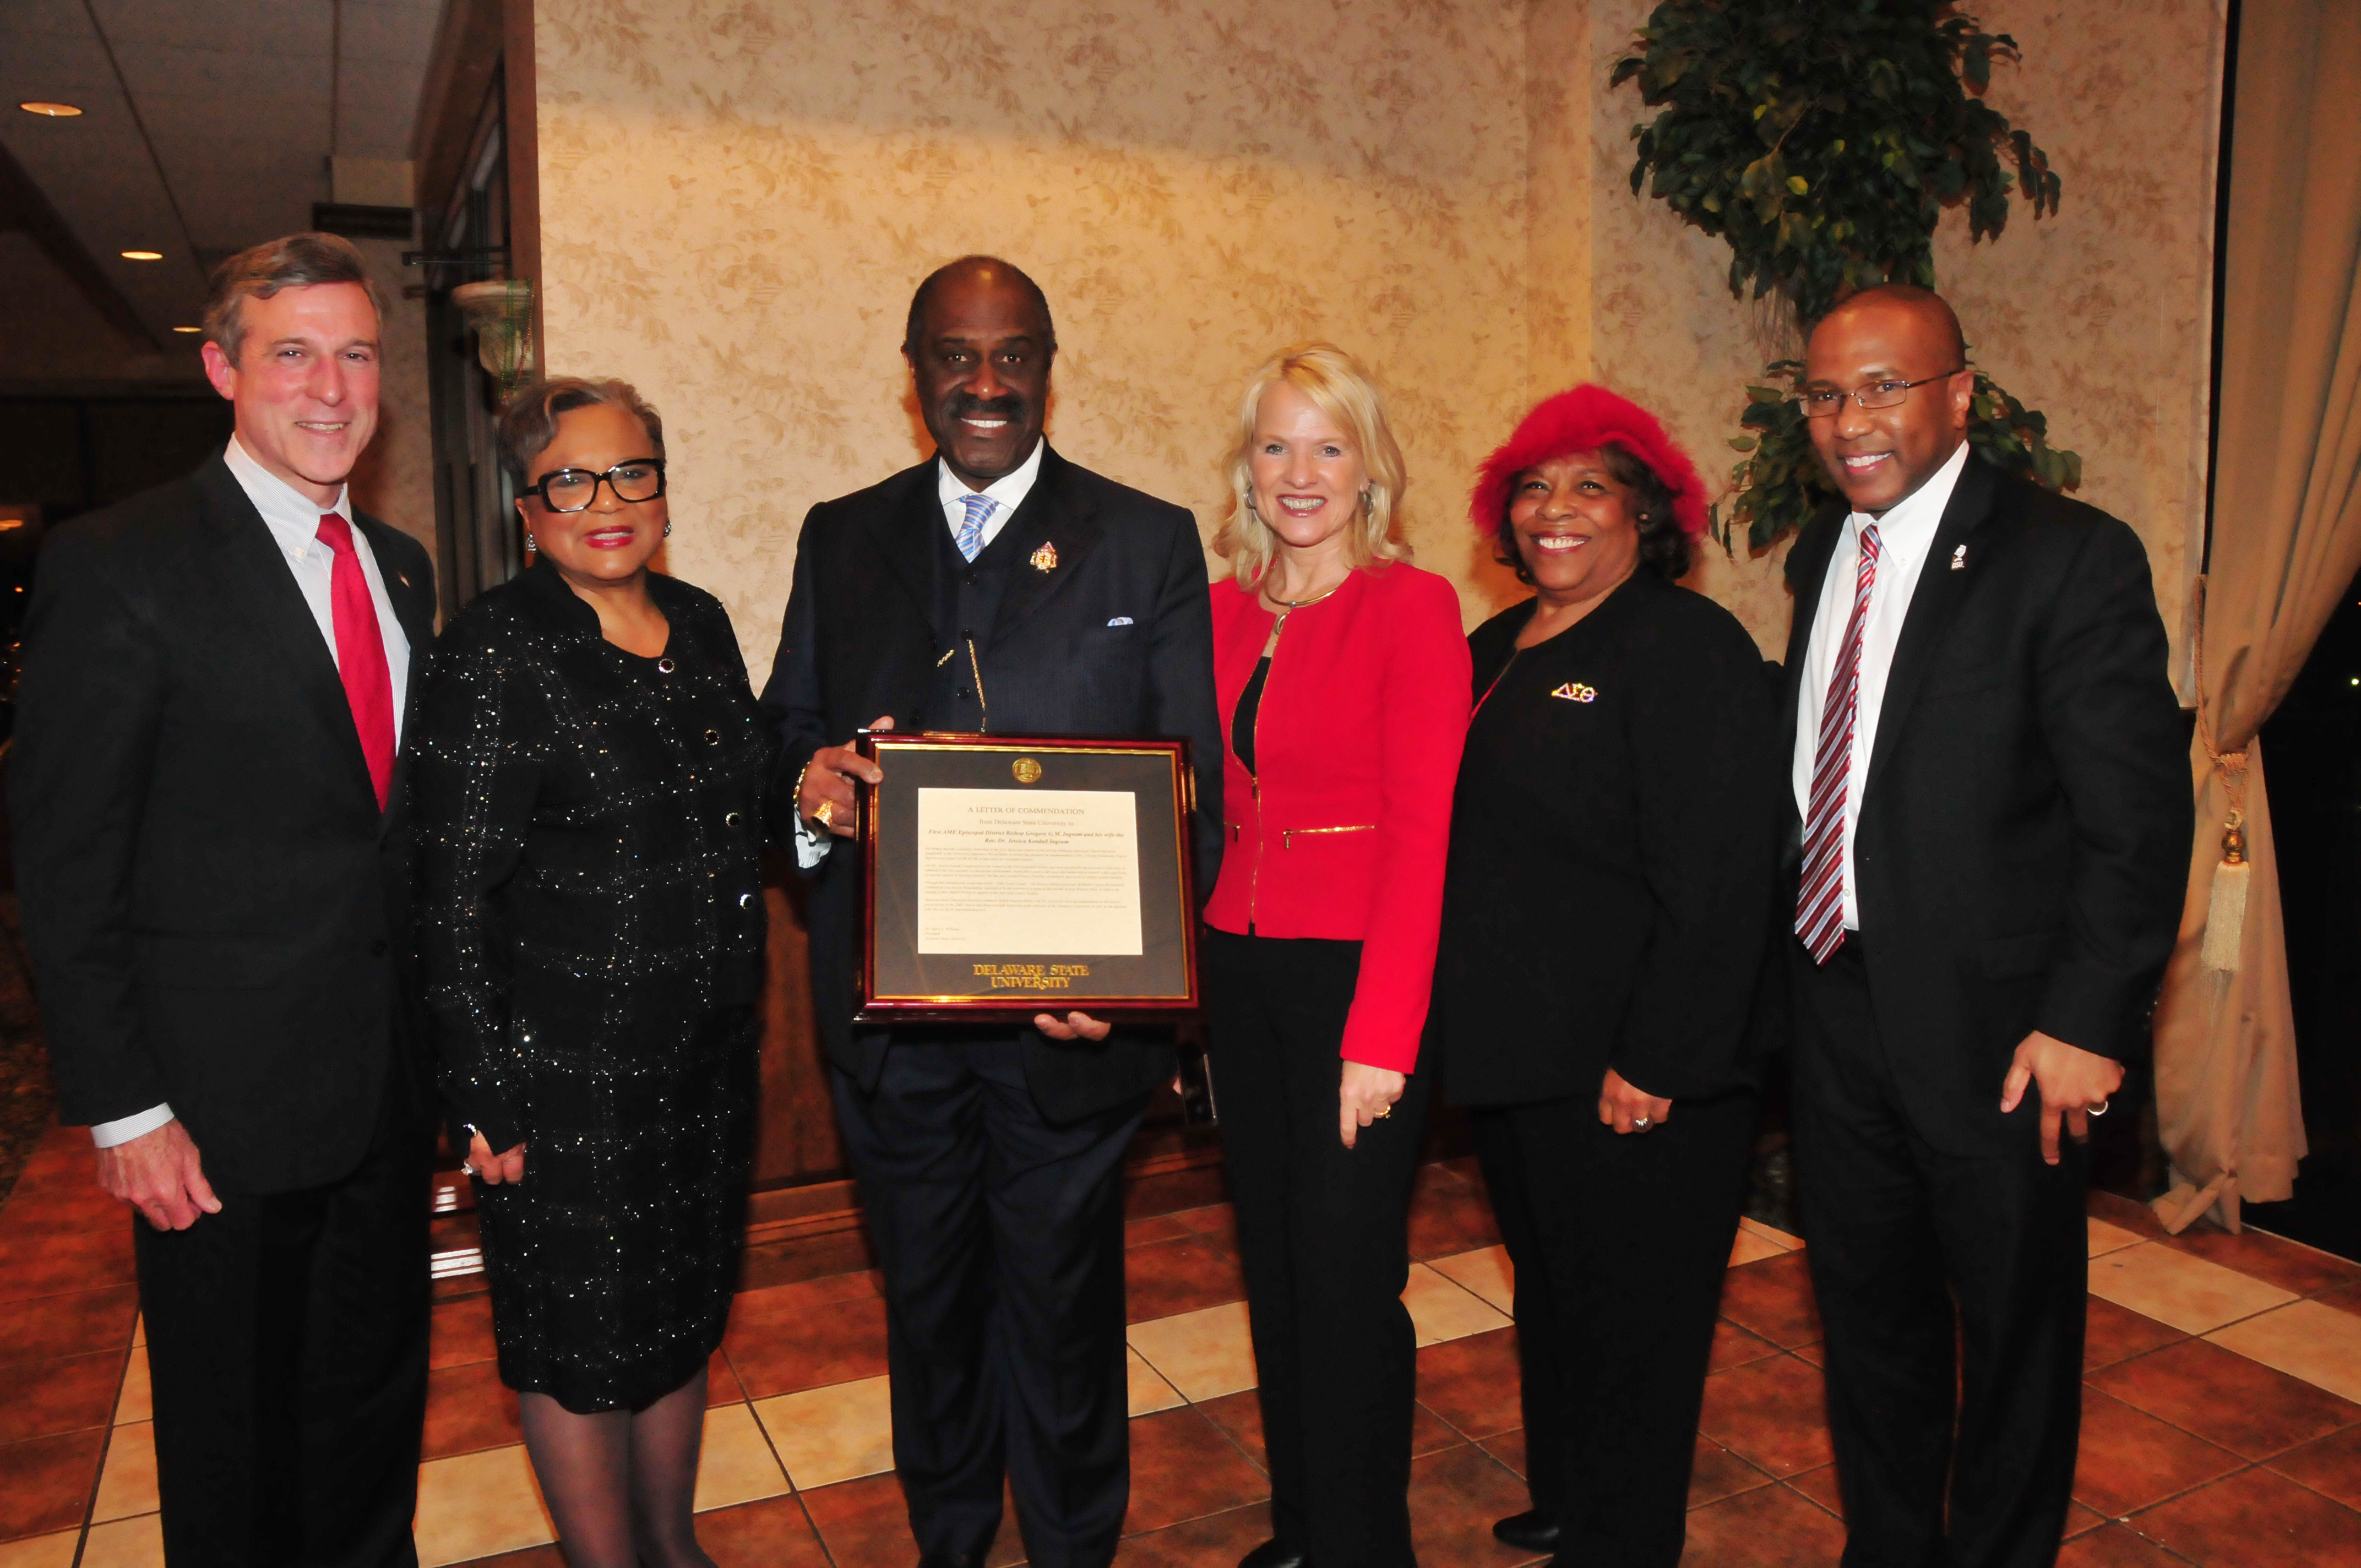 (L-r) Gov. John Carney, Rev. Dr. Jessica Kendall Ingram and her husband Bishop Gregory G.M. Ingram, Lt. Gov. Bethany Hall-Long, DSU Board of Trustees member Wilma Mishoe and DSU President Harry L. Williams, who presented the Ingrams with commendation from DSU.